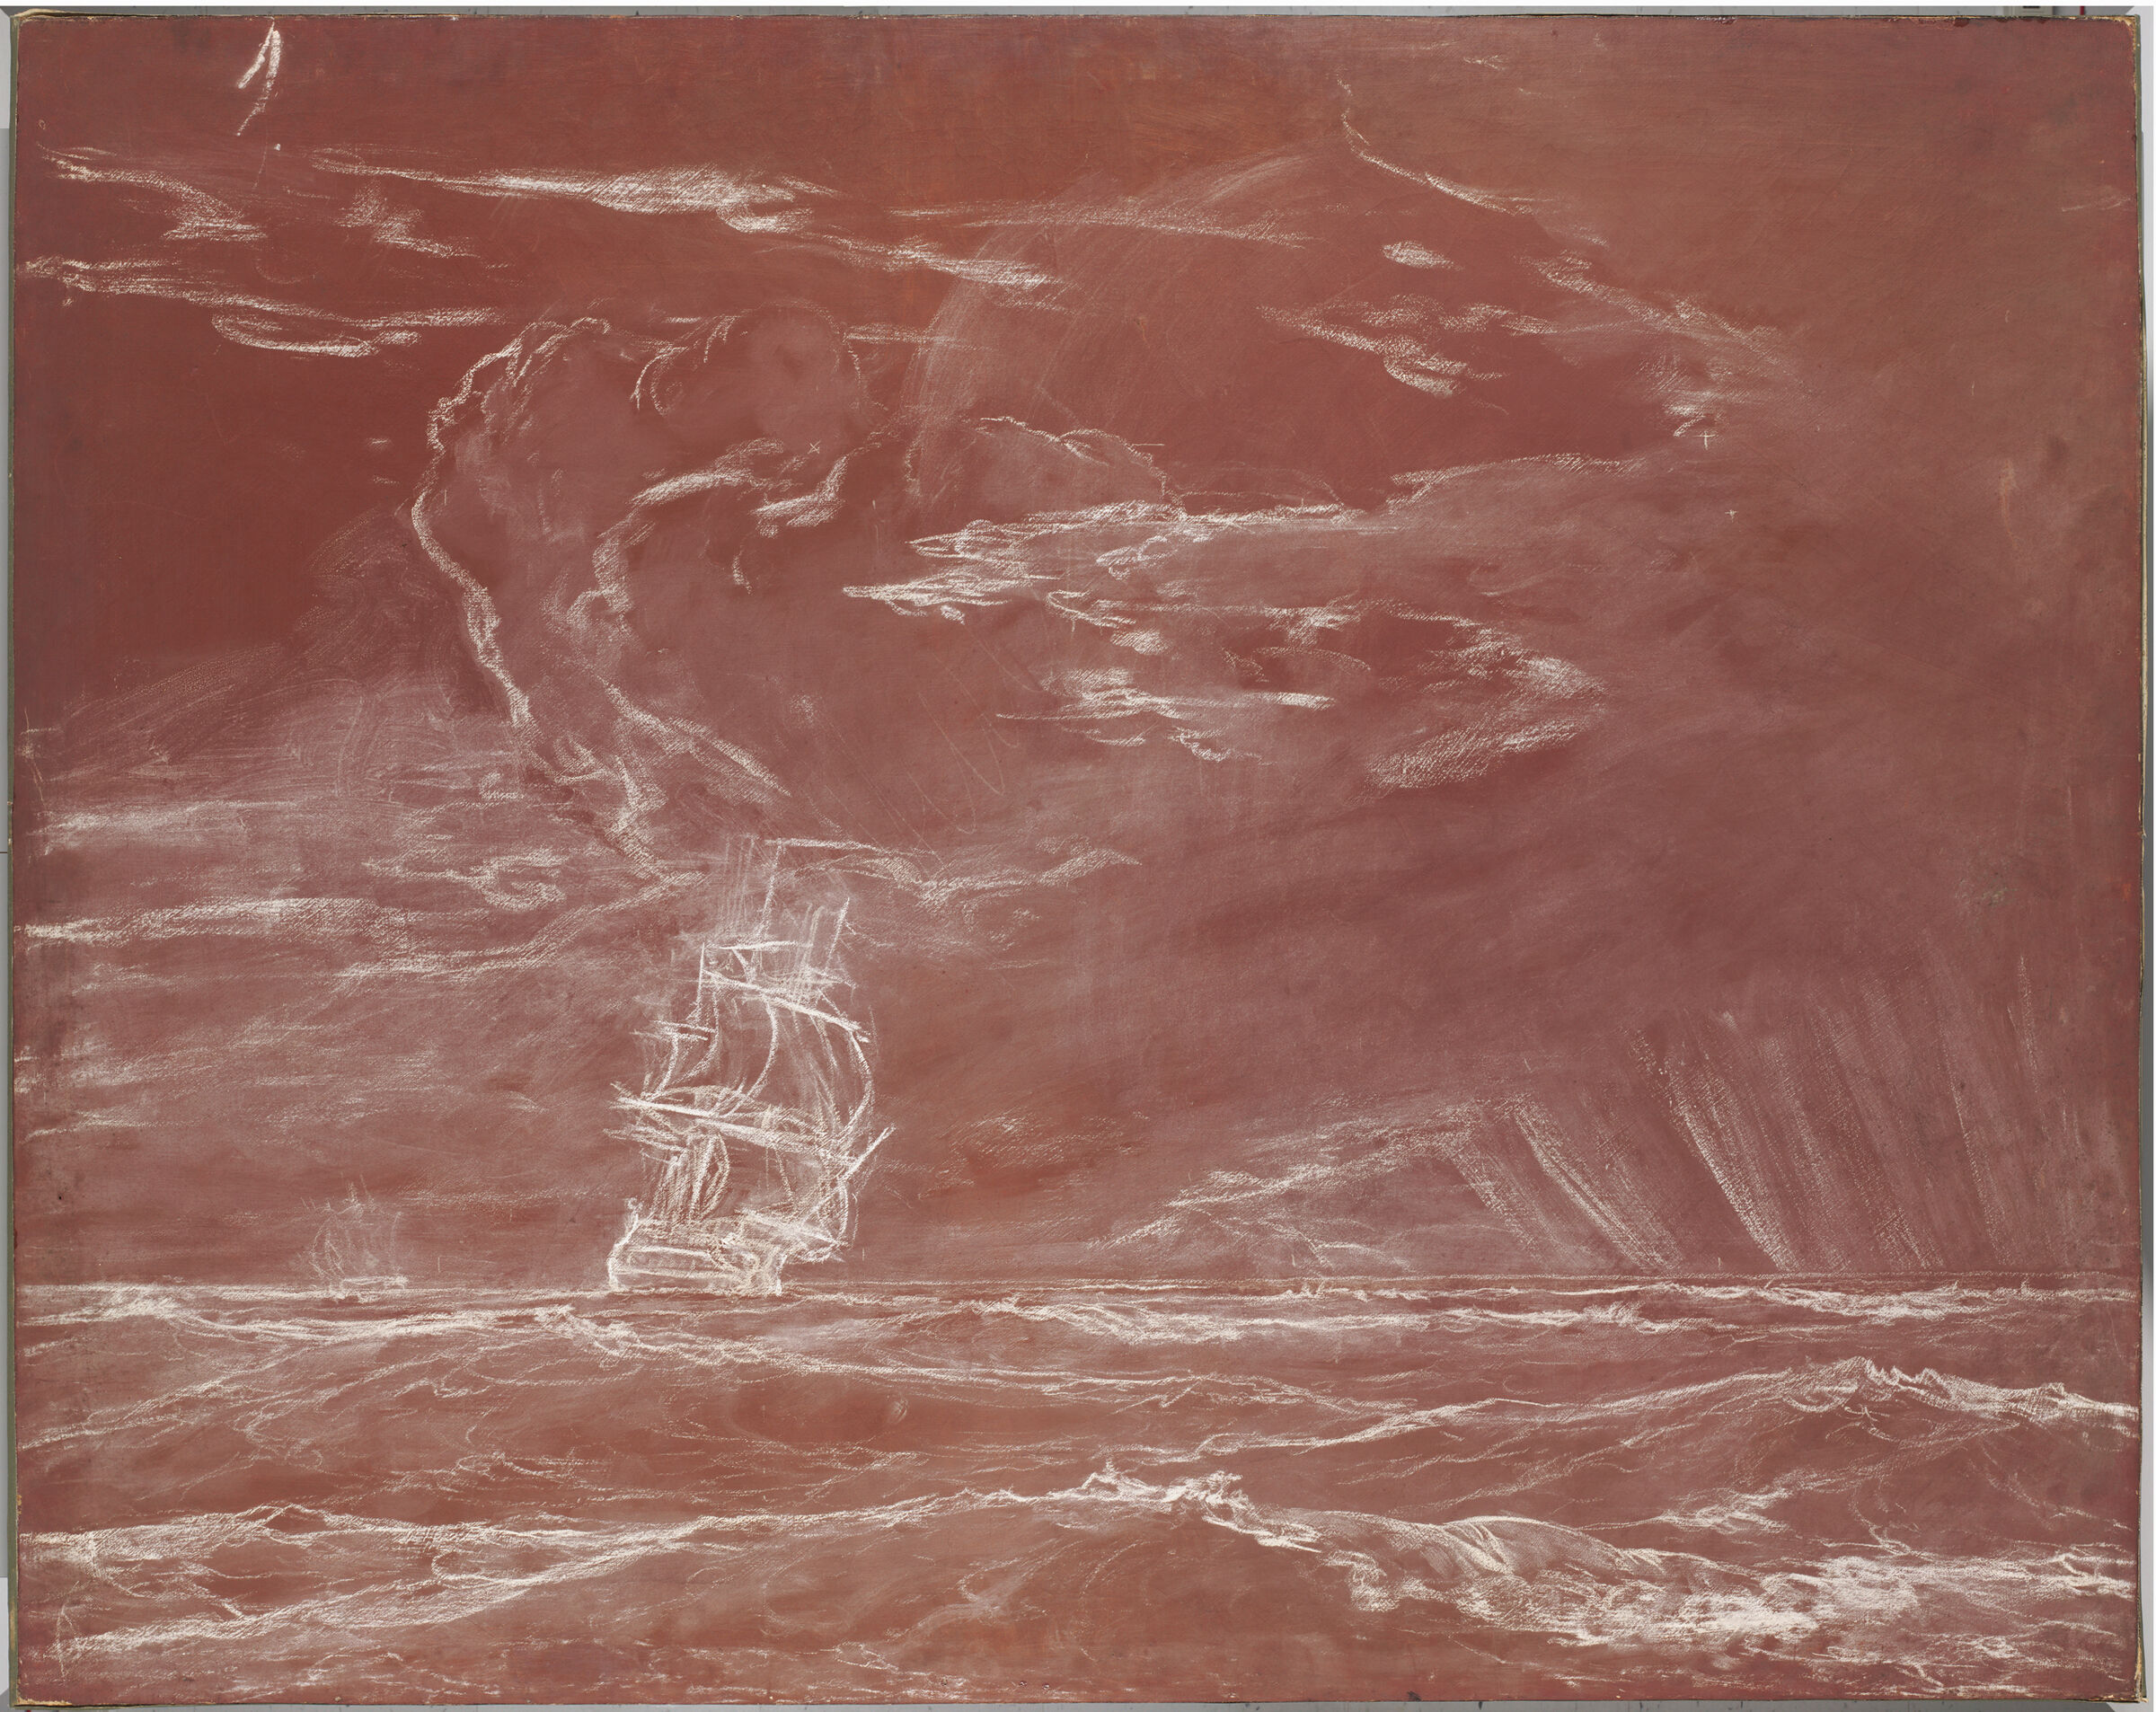 Ship In A Squall